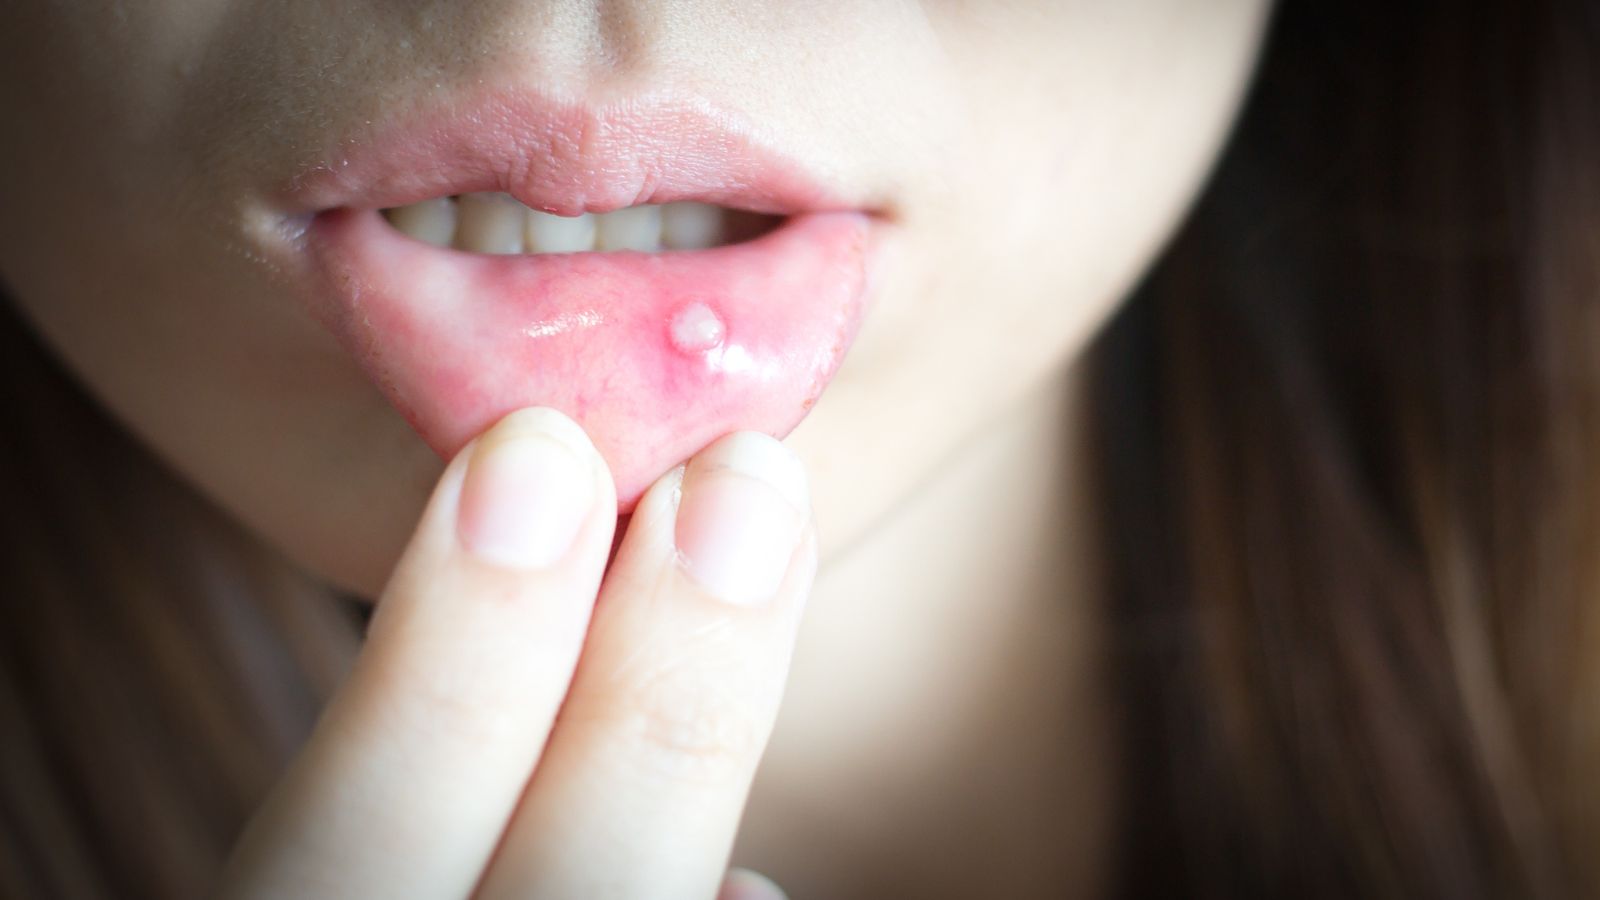 Because of canker sore, Asian woman has aphthae on the lip